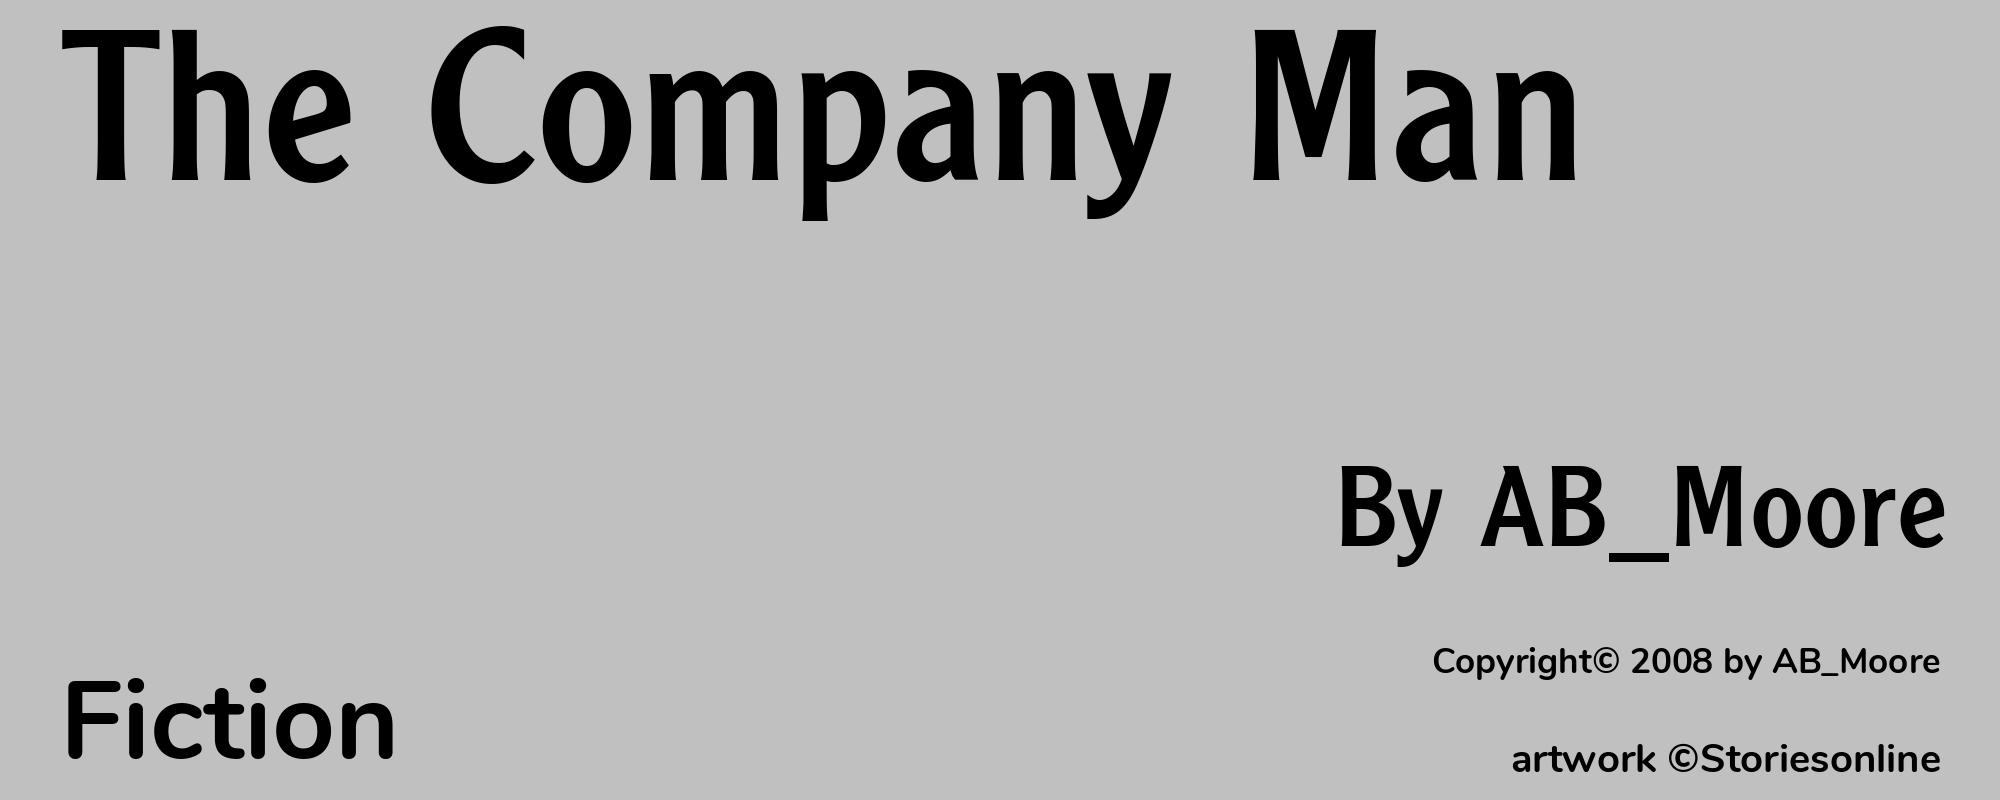 The Company Man - Cover